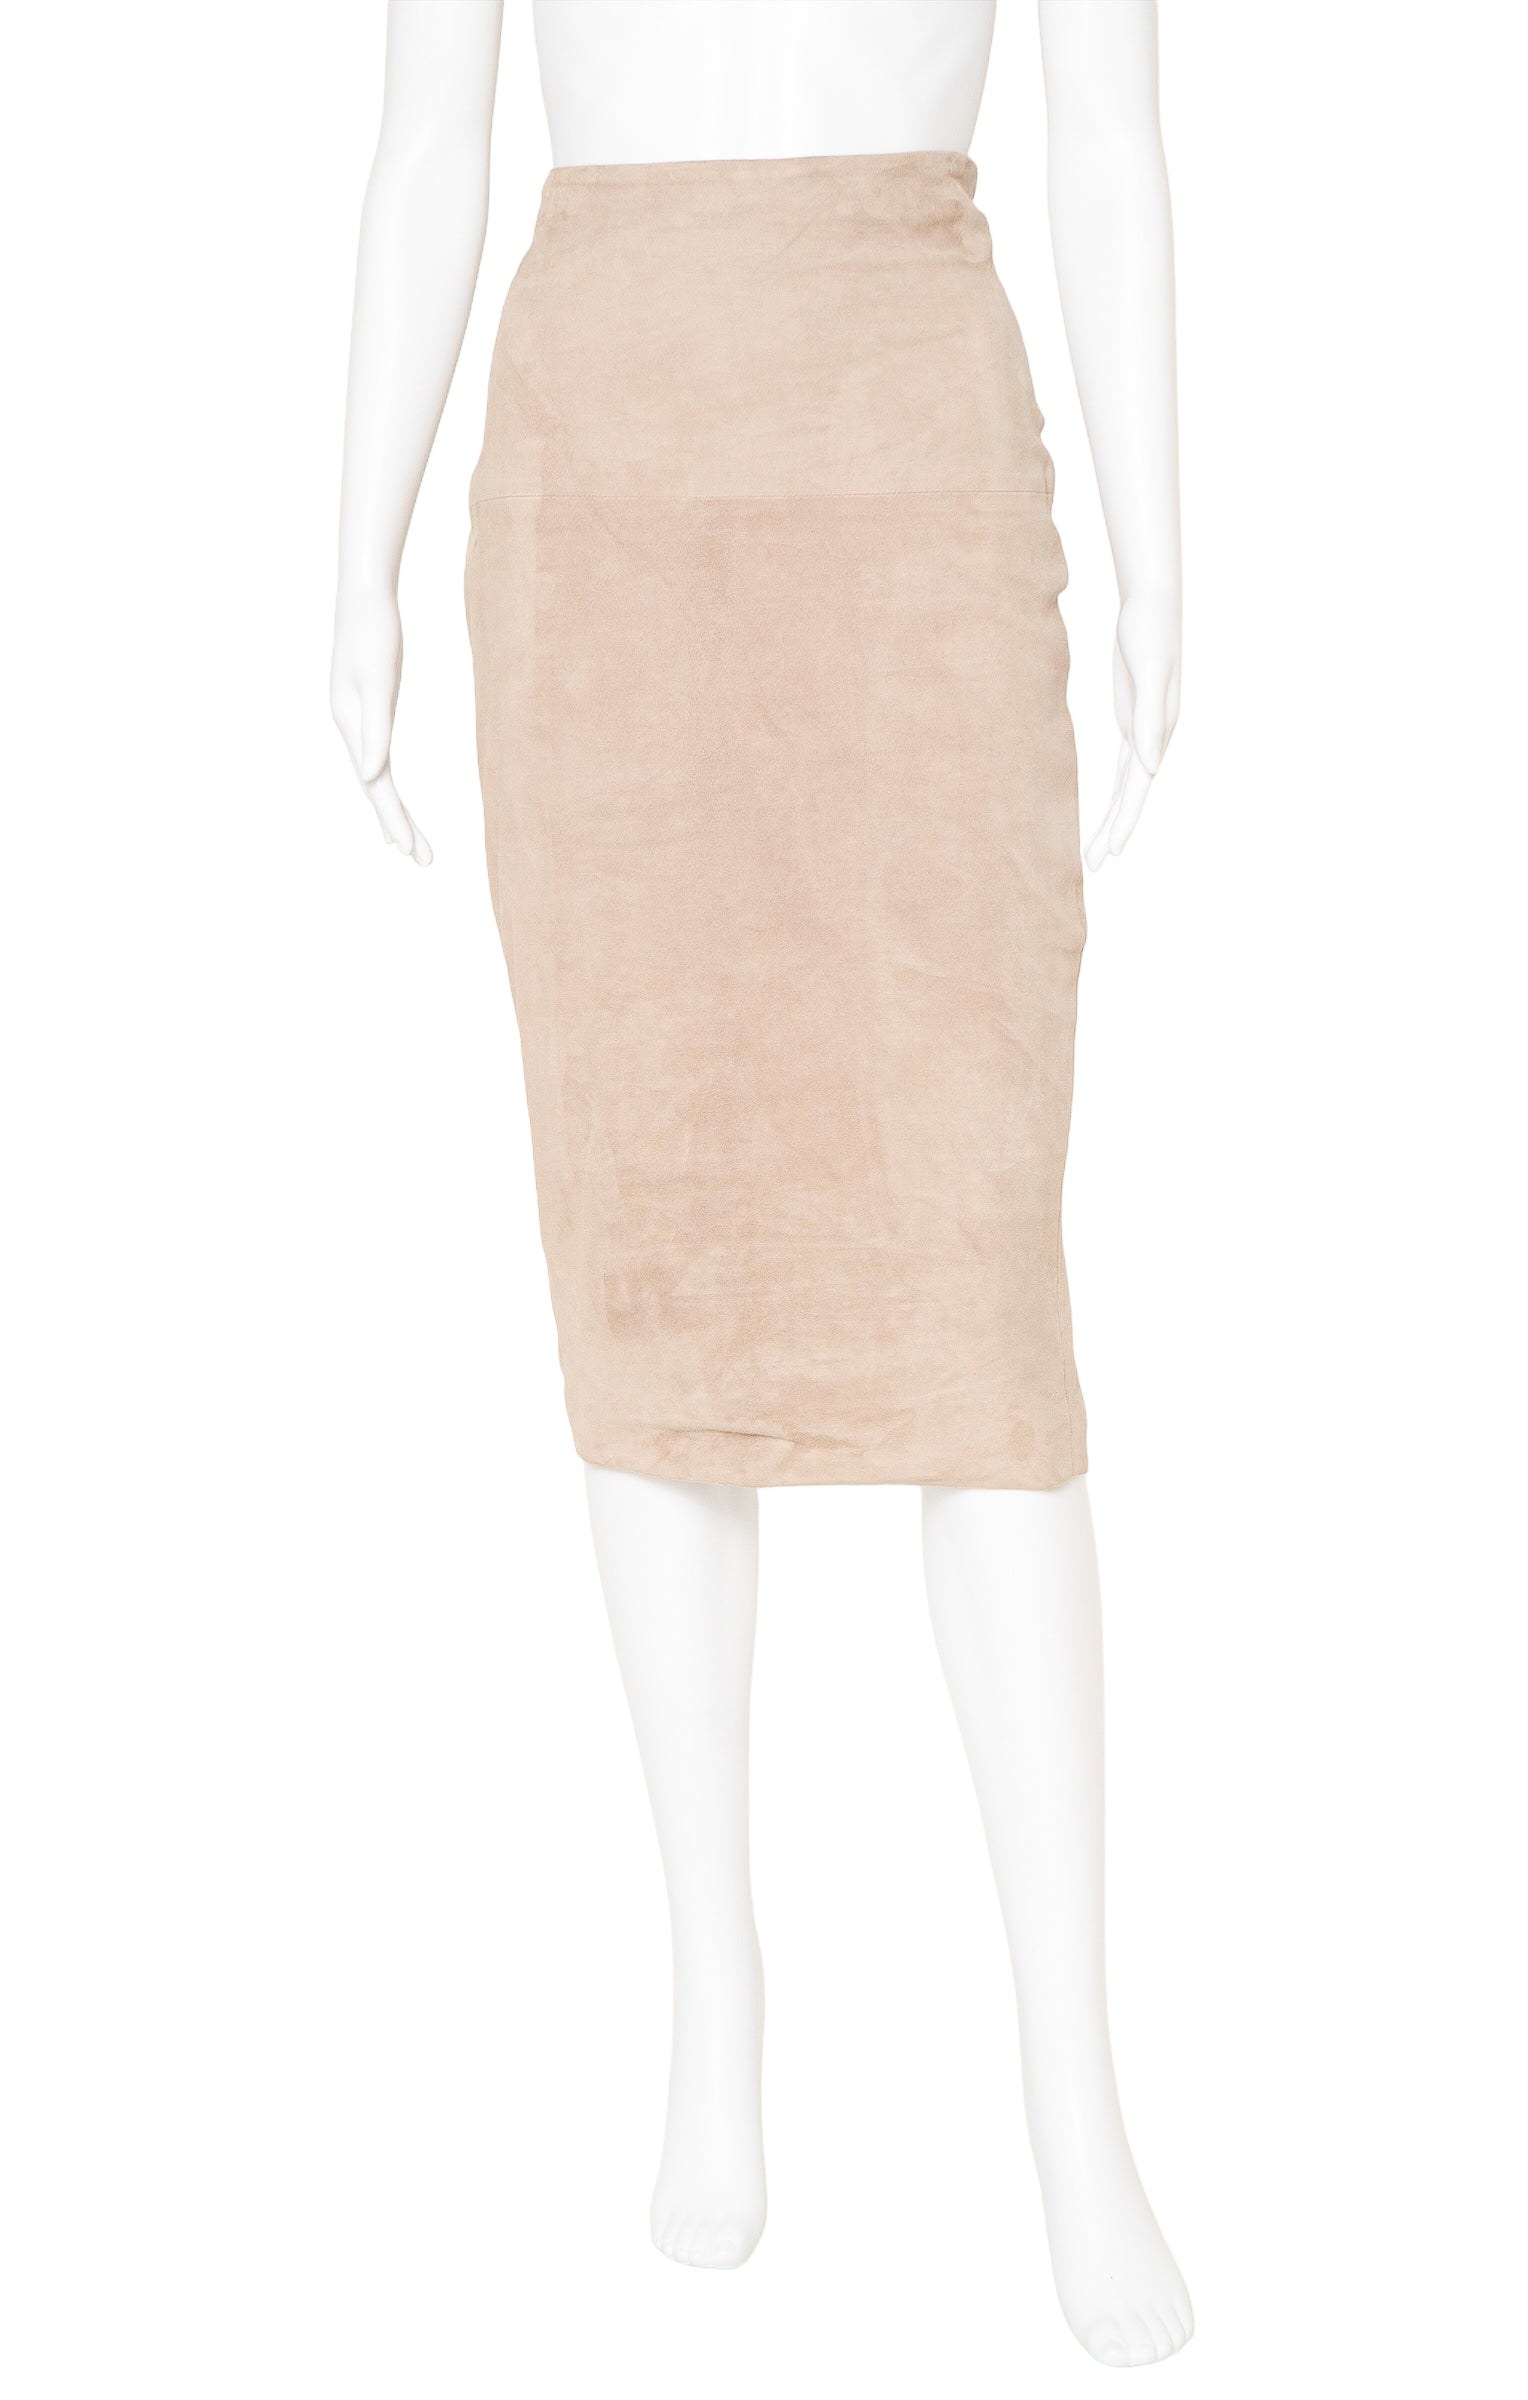 ERMANNO SCERVINO (RARE) Skirt Size: No size tags, fits like US 2-4